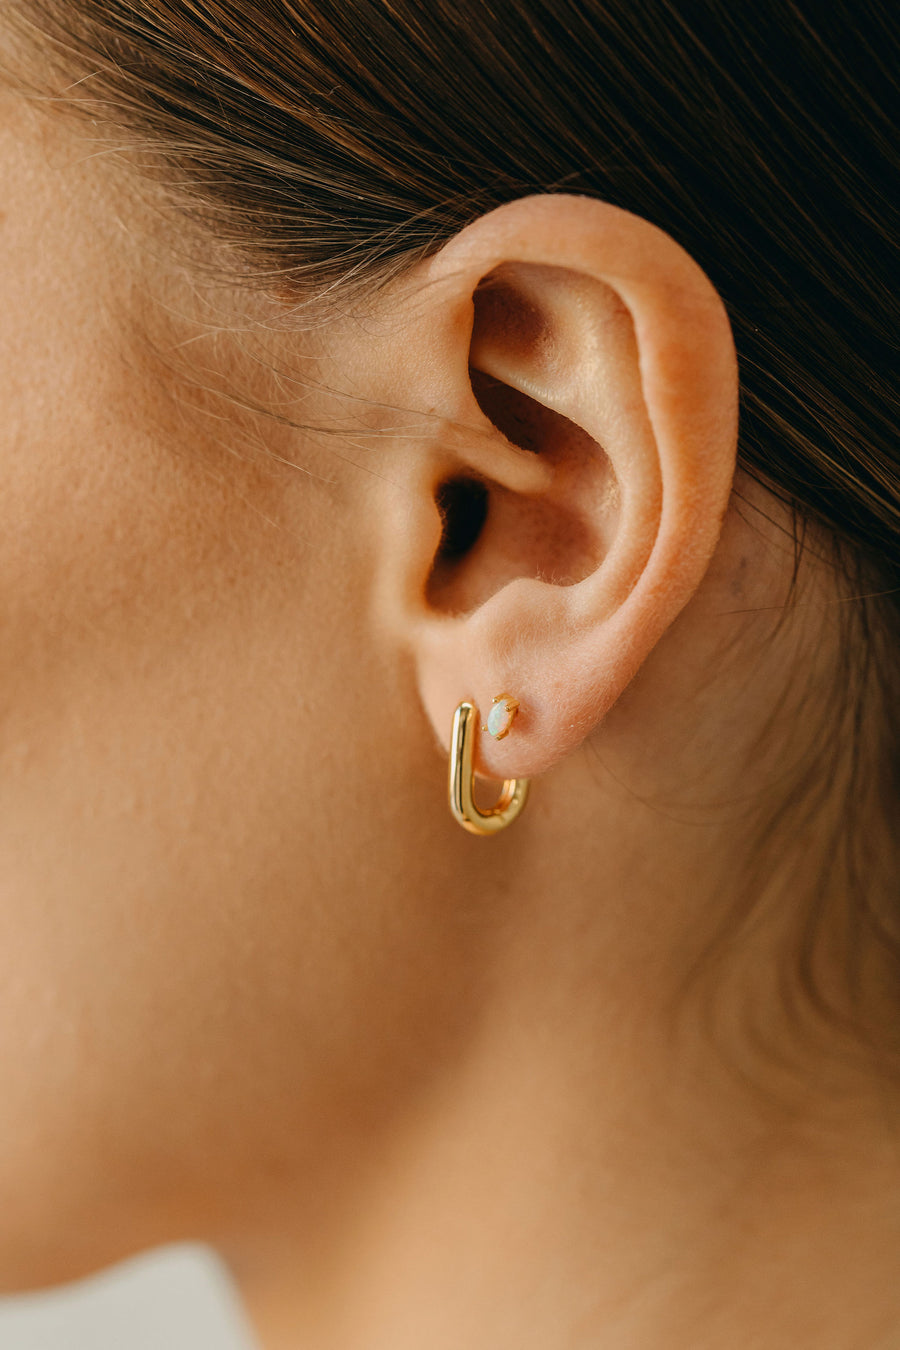 Small Gold Hoop Earrings, Tragus Hoop, Tiny Ethnic Earrings, Daith  Piercing, Cartilage Jewelry, Helix Earrings, Huggie Earrings G1 - Etsy | Small  gold hoop earrings, Small silver hoop earrings, Gold earrings for kids